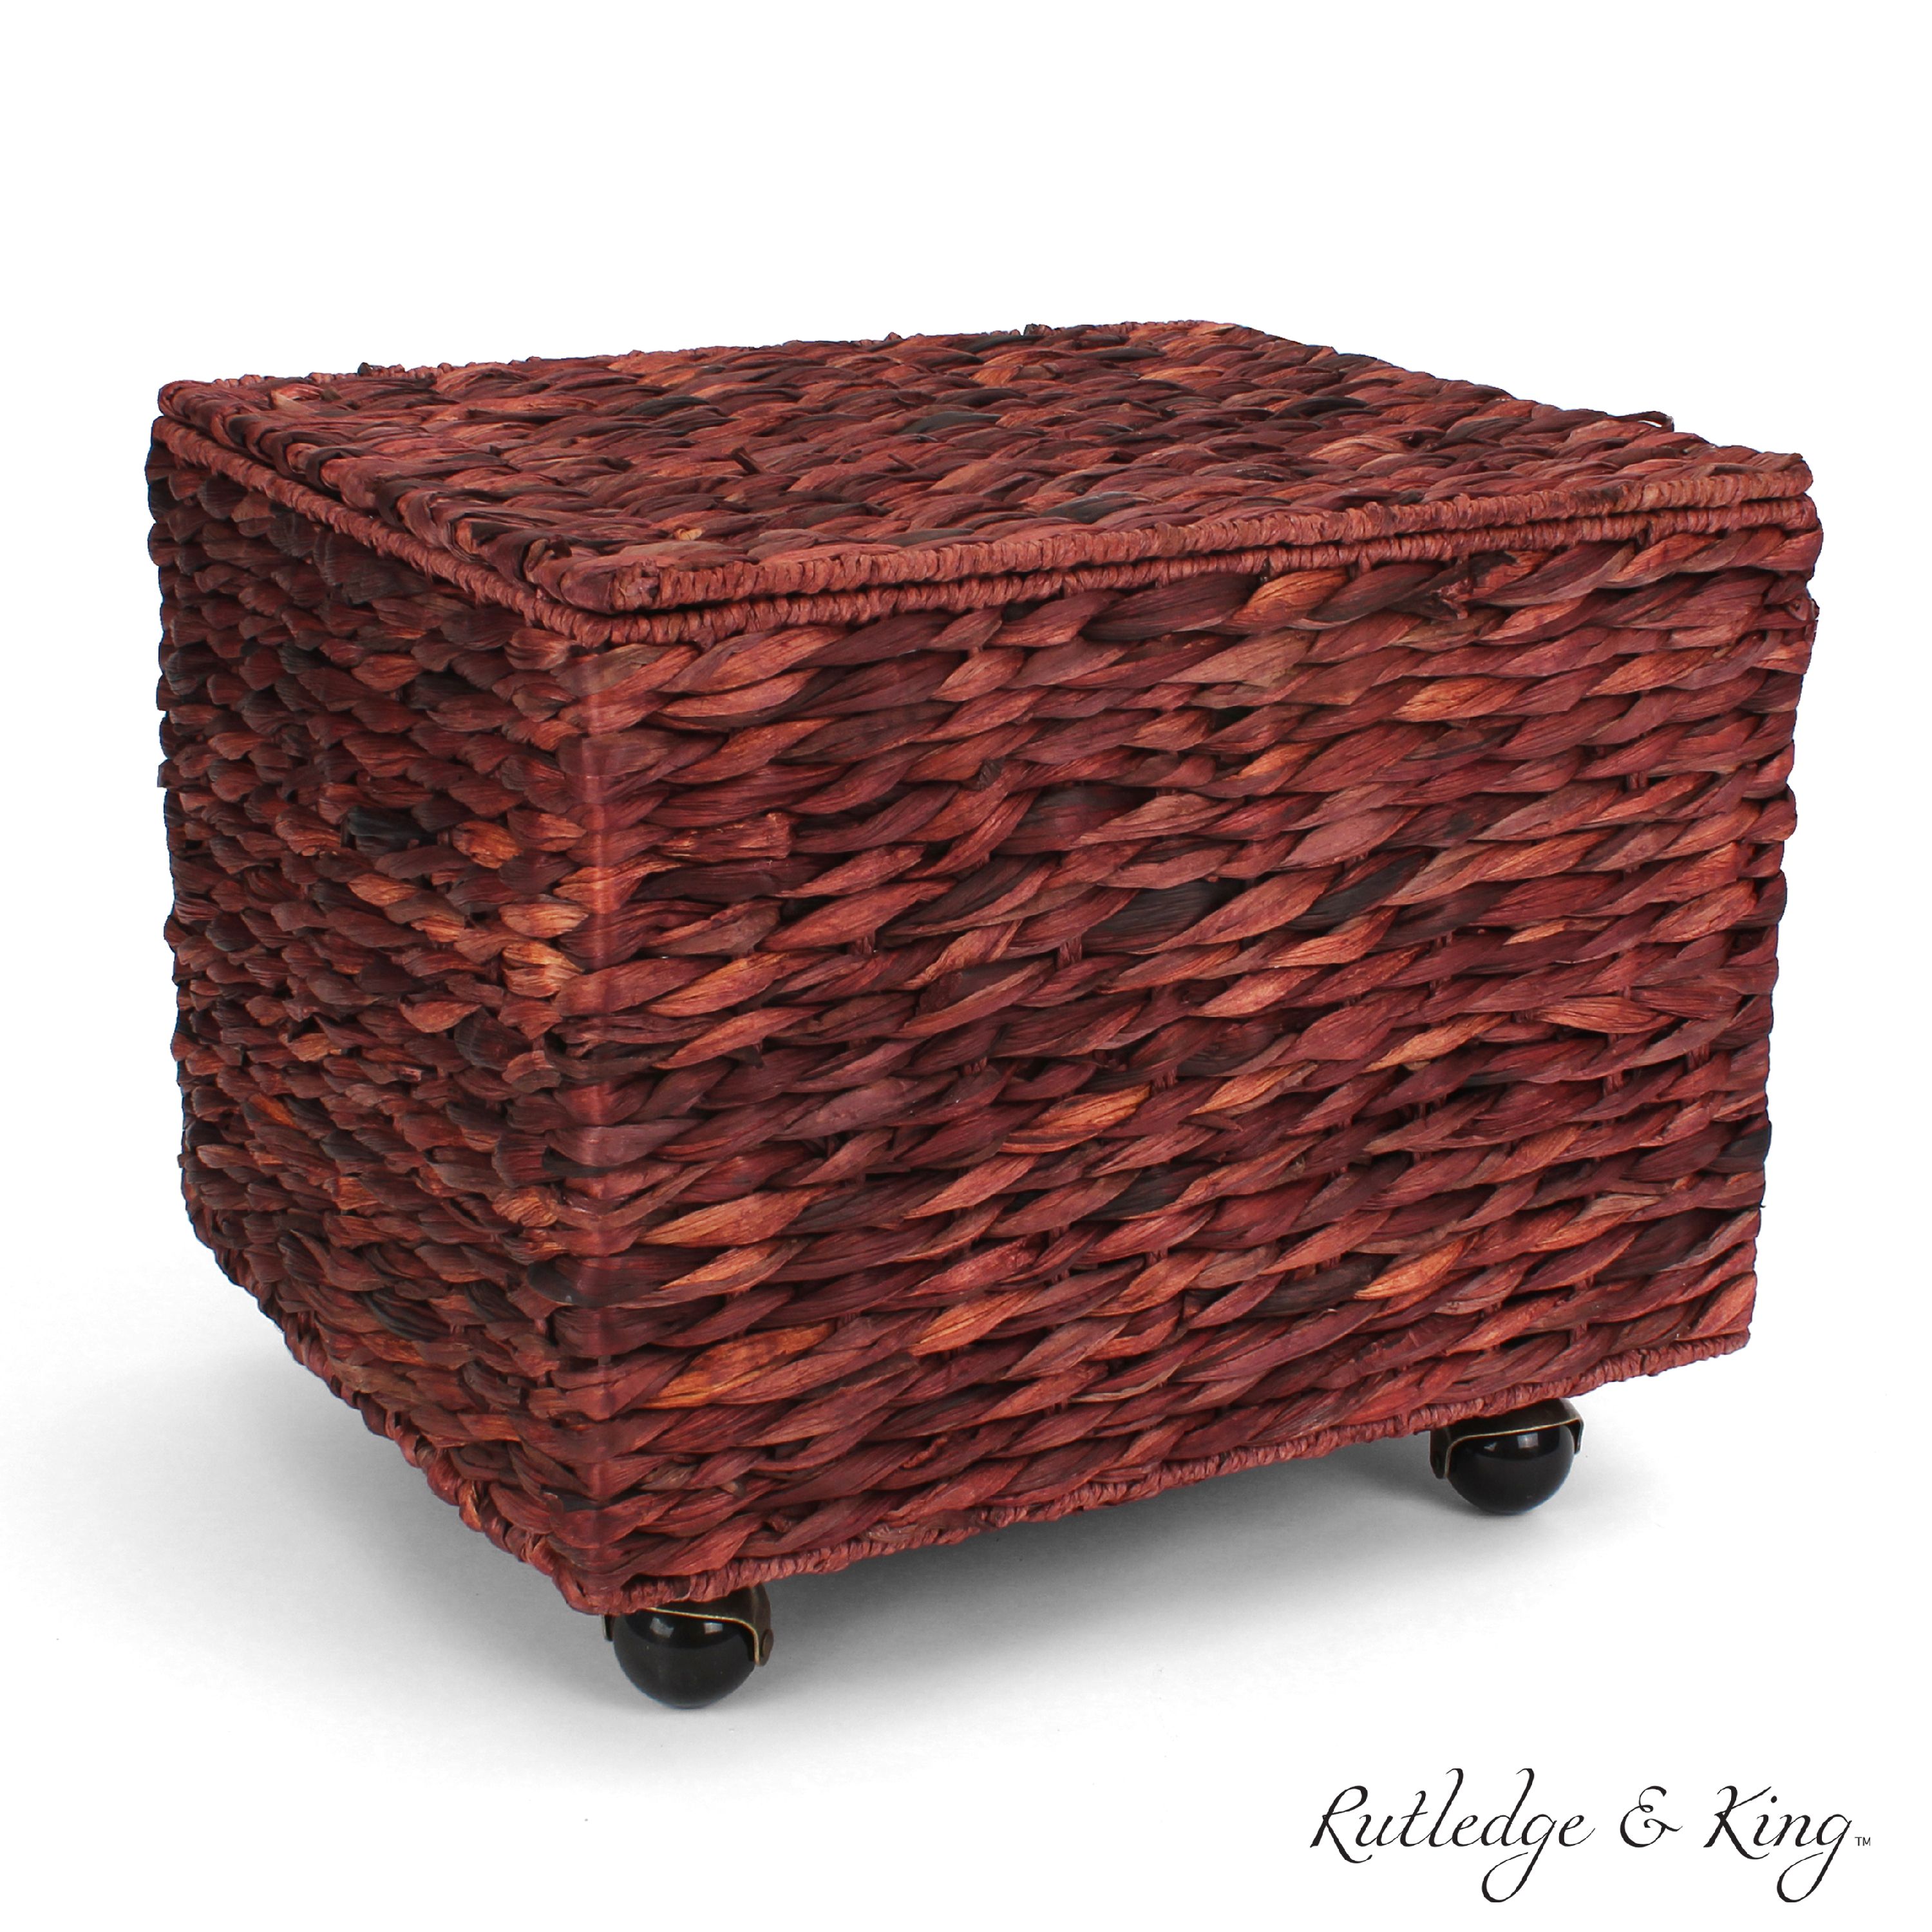 Seagrass Rolling File Cabinet - Home Filing Cabinet - Hanging File Organizer - Home and Office Wicker File Cabinet - Water Hyacinth Storage Basket for File Storage (Russet Brown) … - image 1 of 4